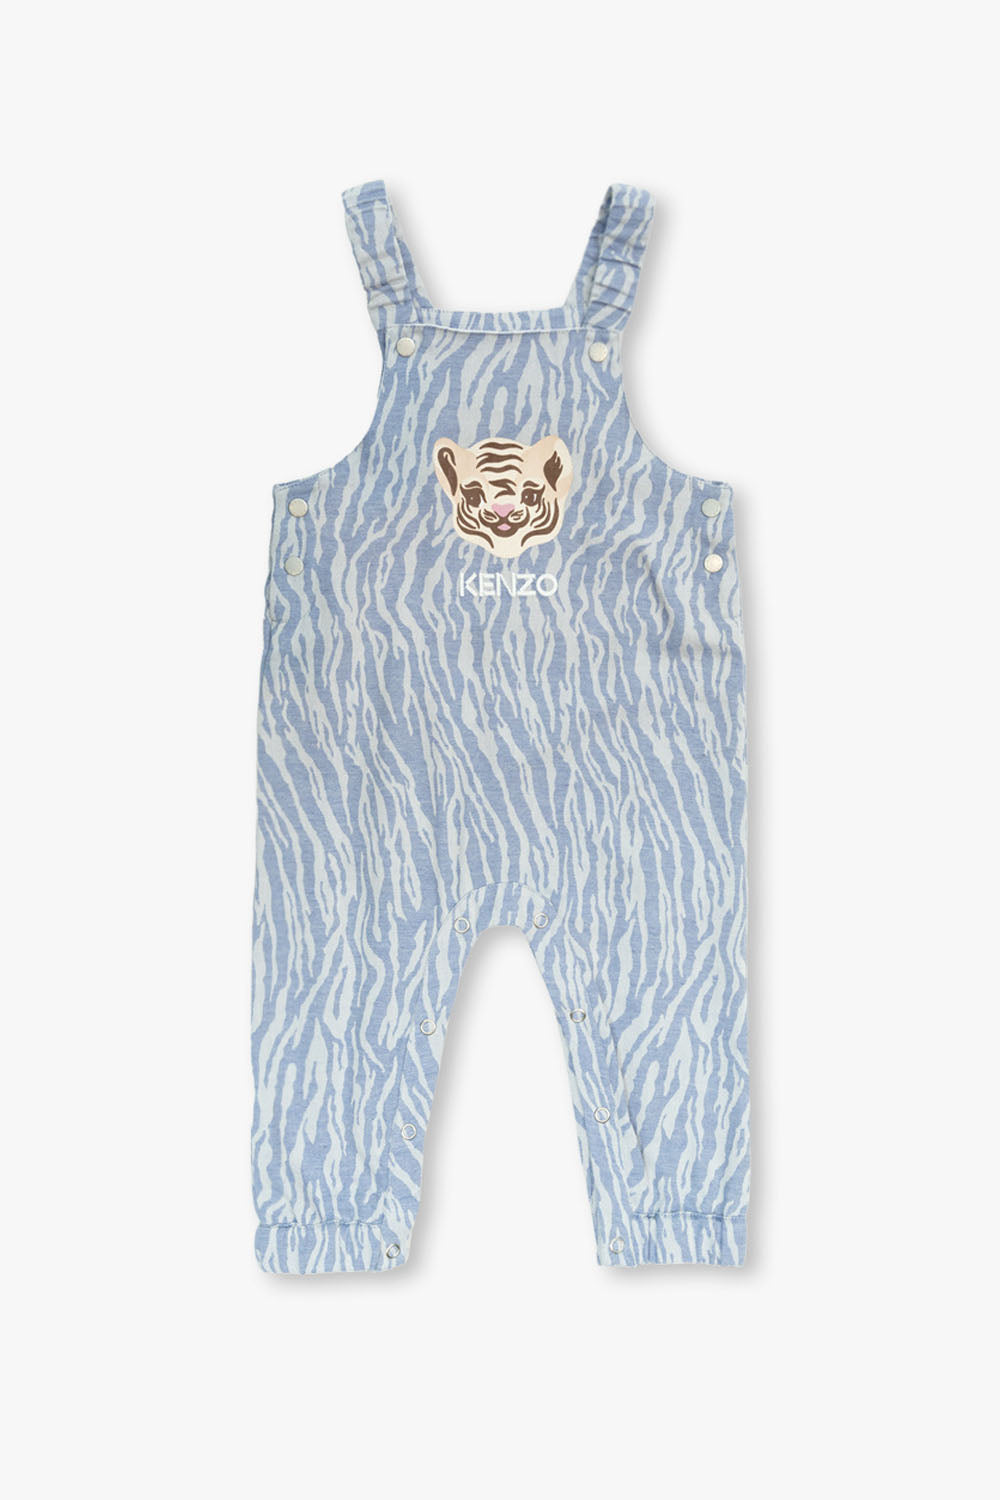 Tiger Stripes Pattern Overalls And Short-Sleeves Tiger Stripes Pattern Overalls And Short-Sleeves T-Shirt Set for Boys Maison7